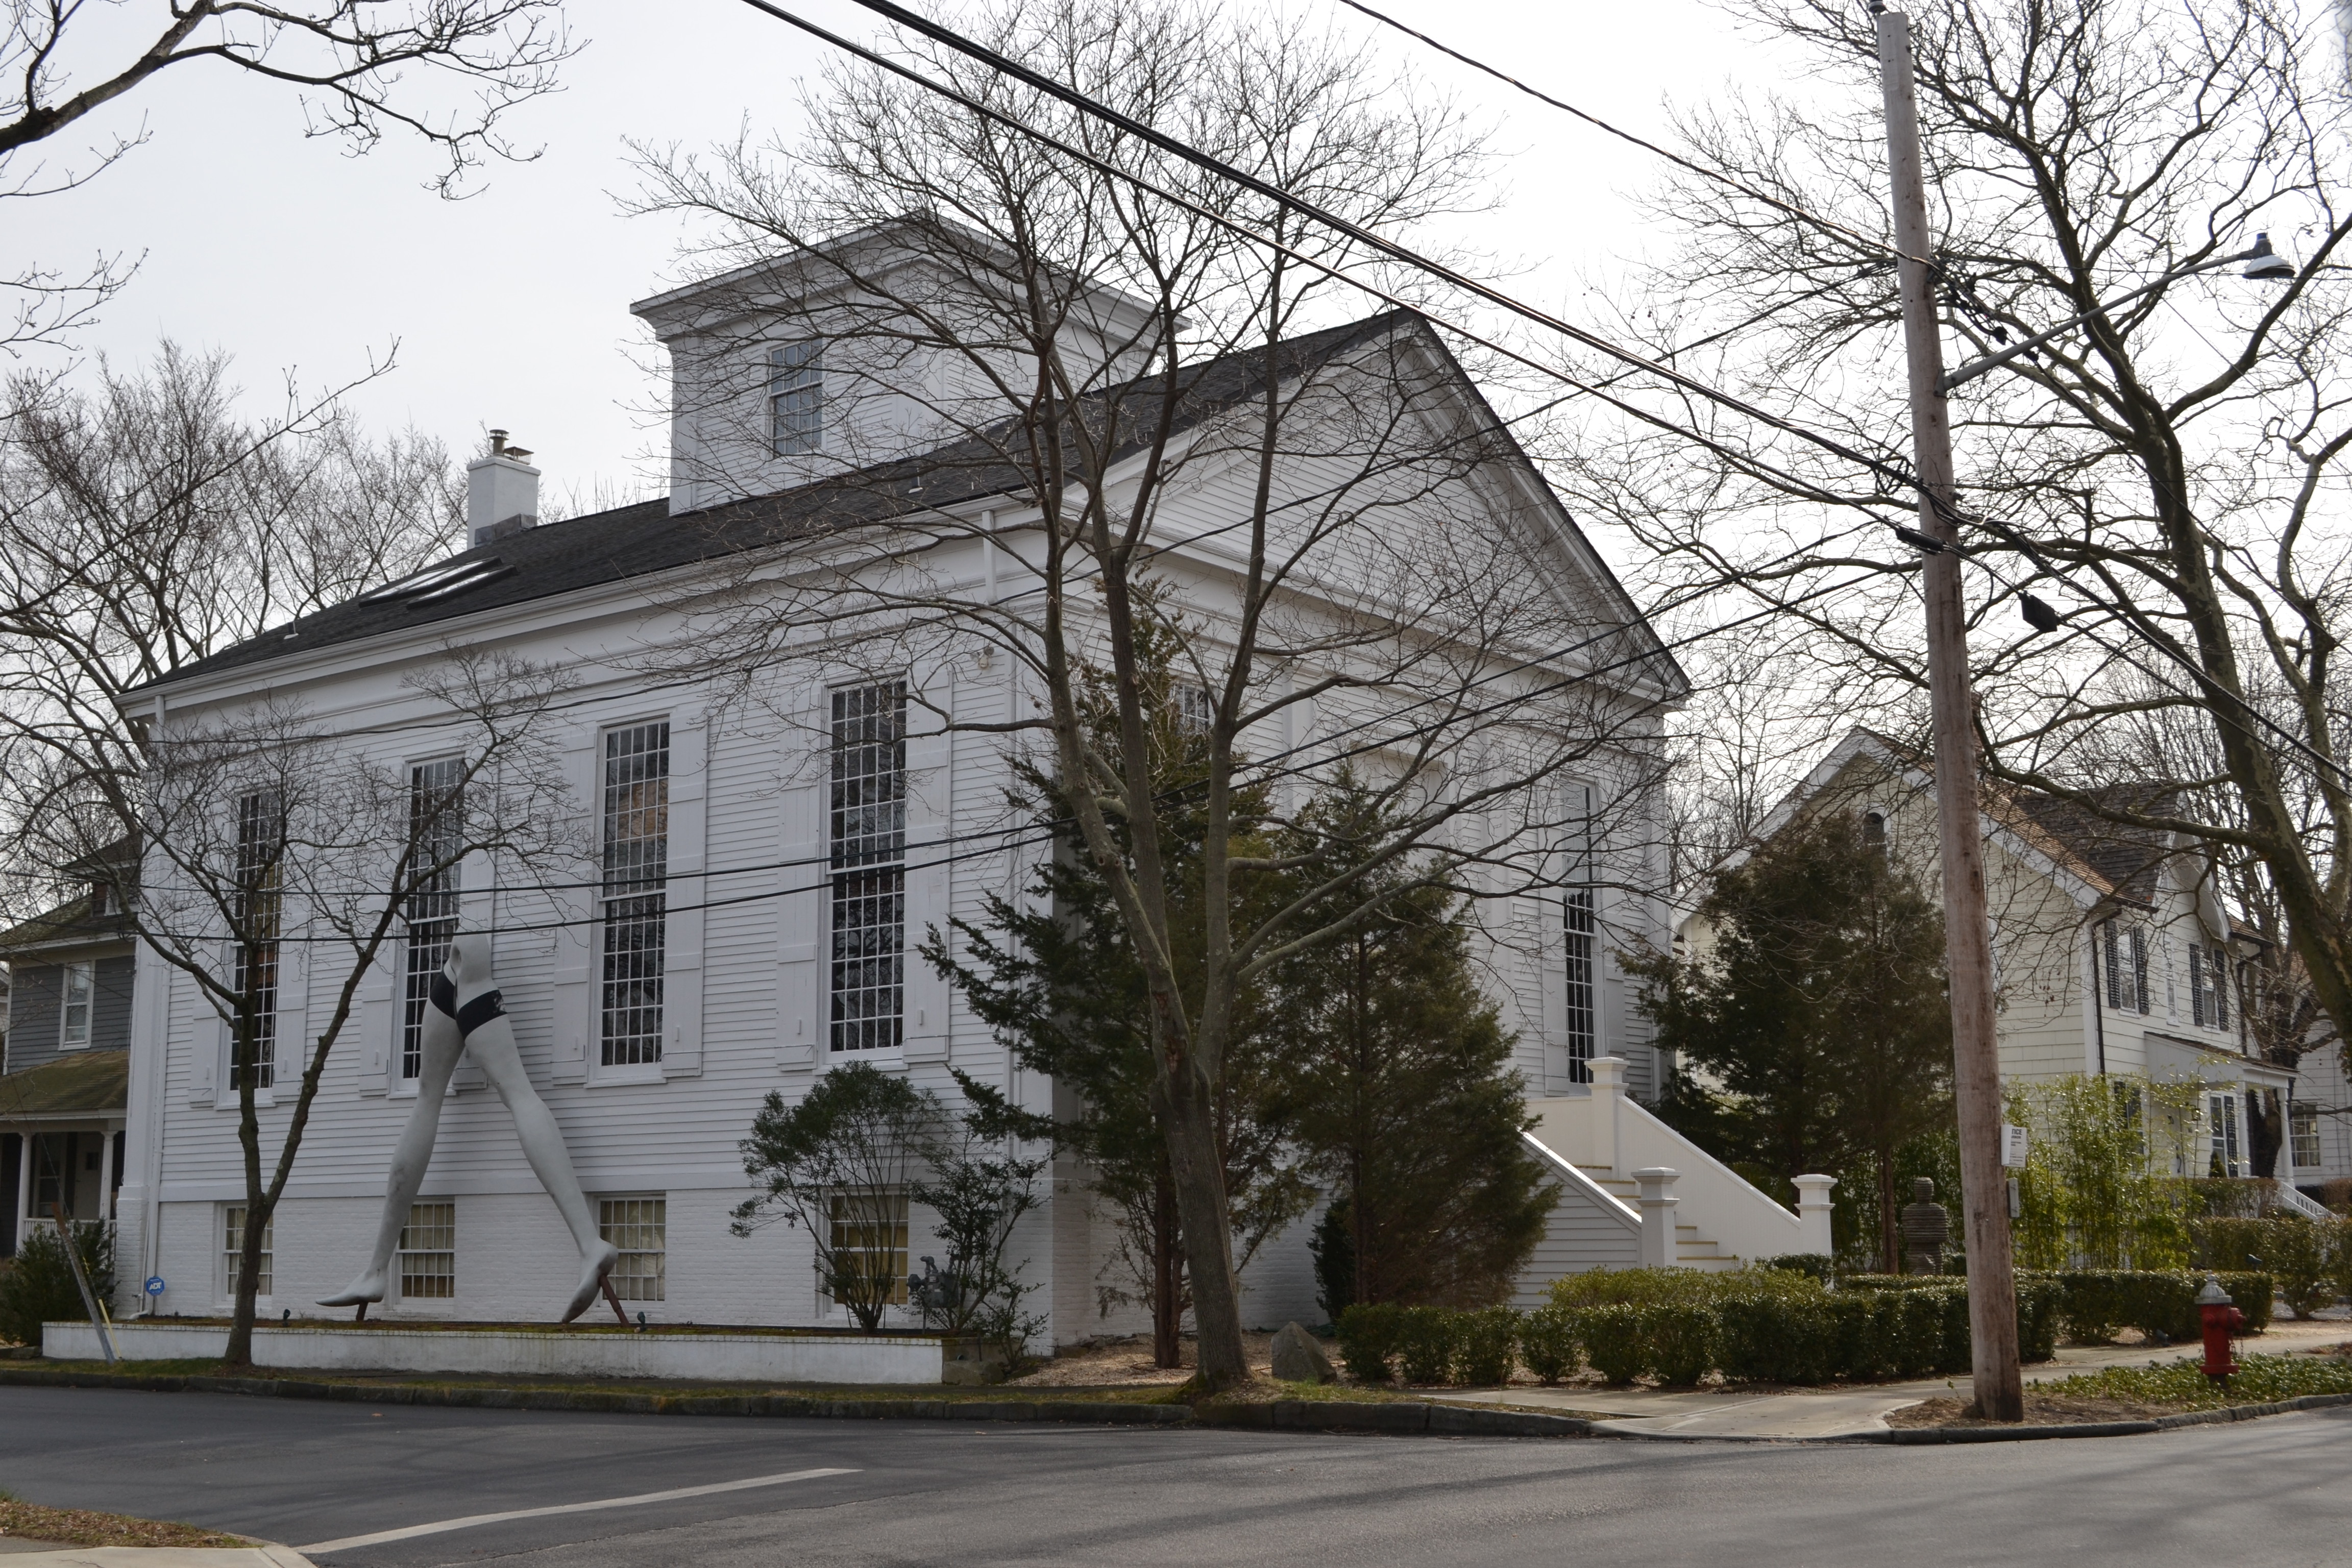 "Legs" by Larry Rivers installed in Sag Harbor. The building formerly housed the Bethel Baptist Church before being renovated into a private residence.